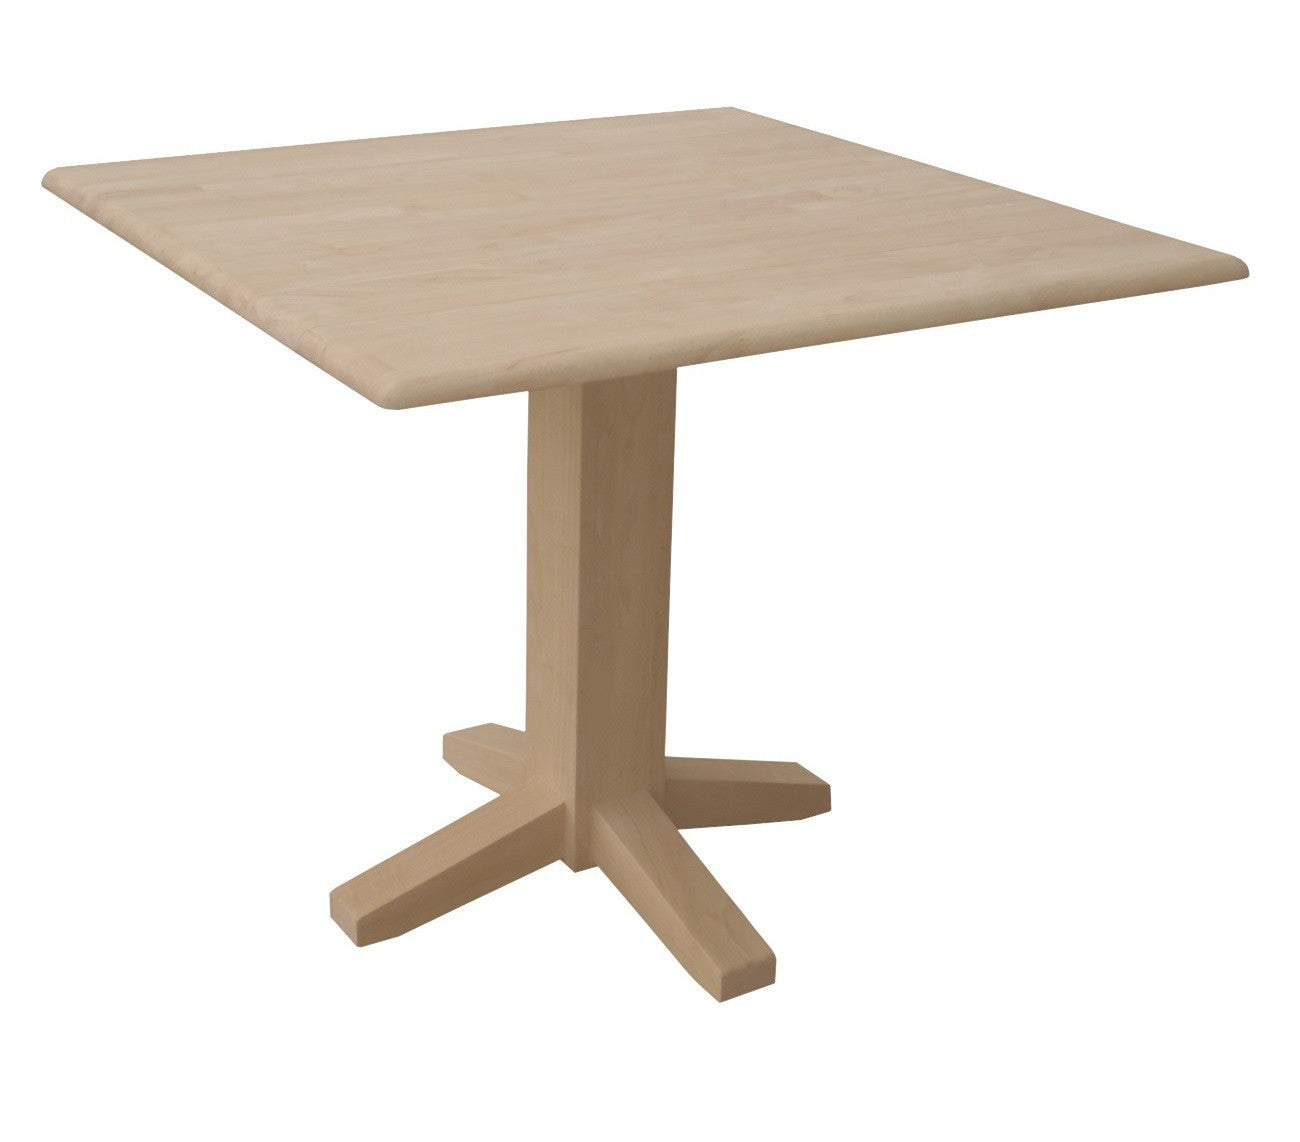 [36x36 Inch] Square Dropleaf Dining Table